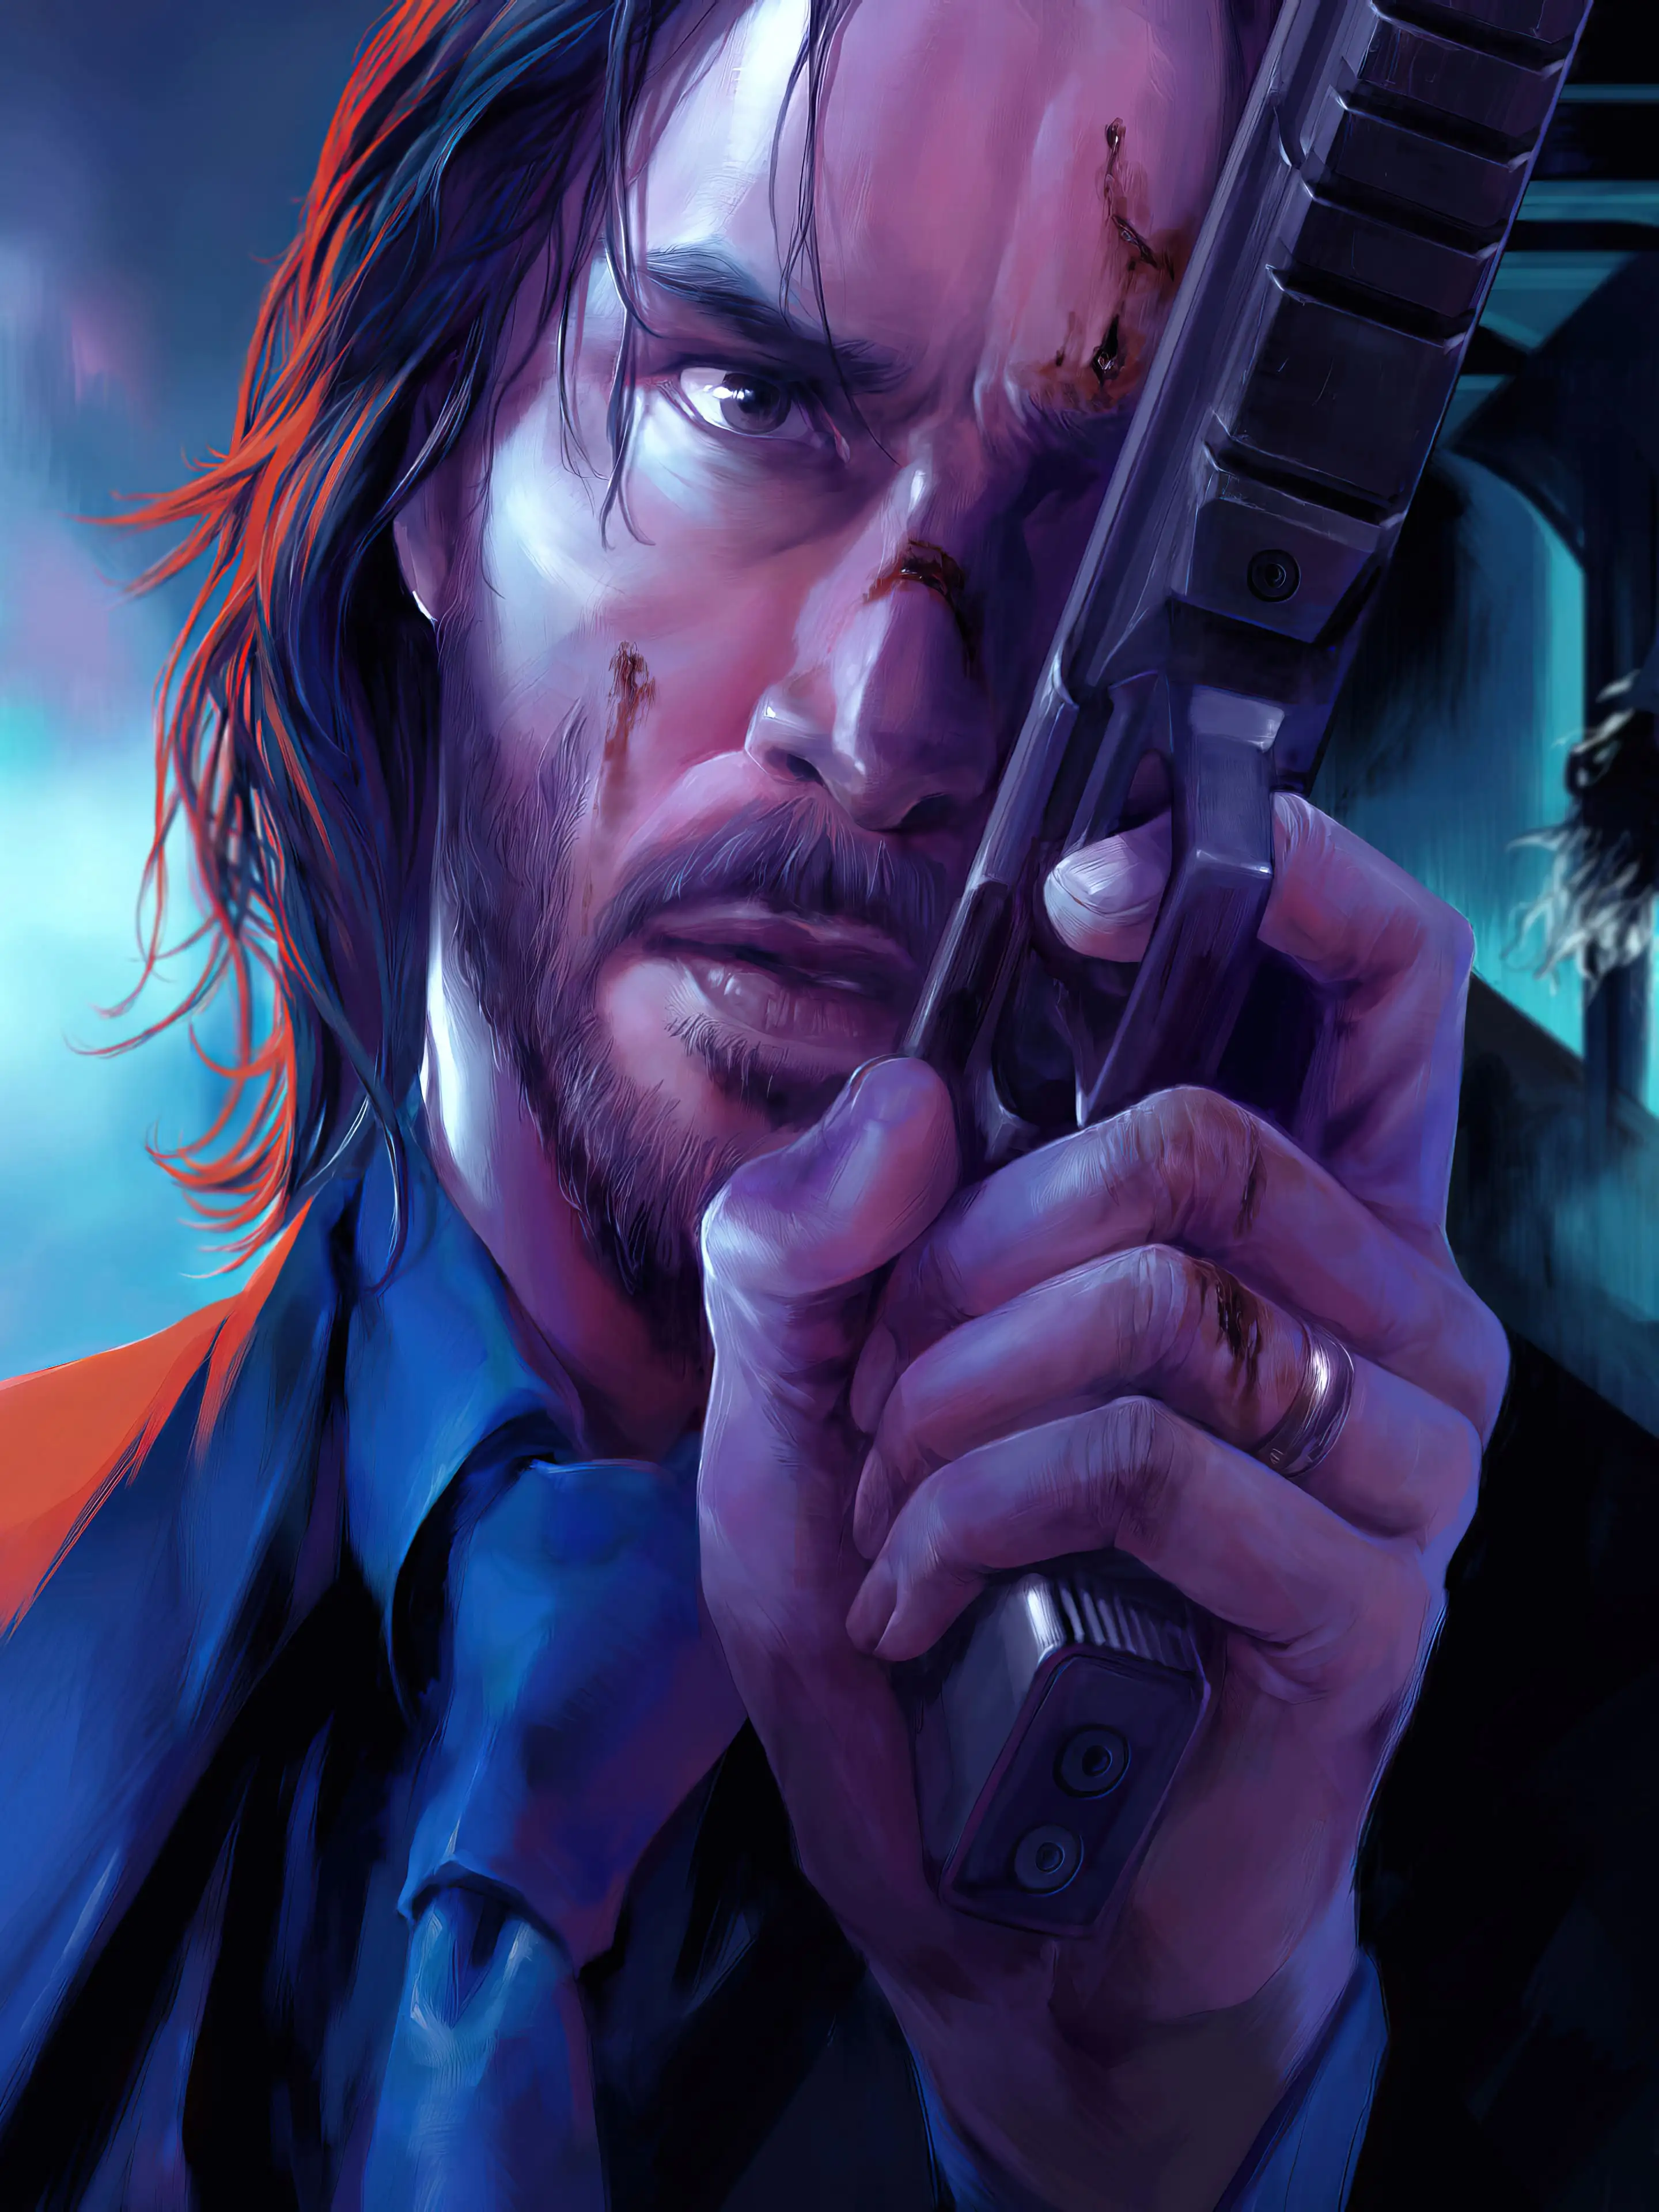 Download John Wick wallpapers for mobile phone free John Wick HD  pictures